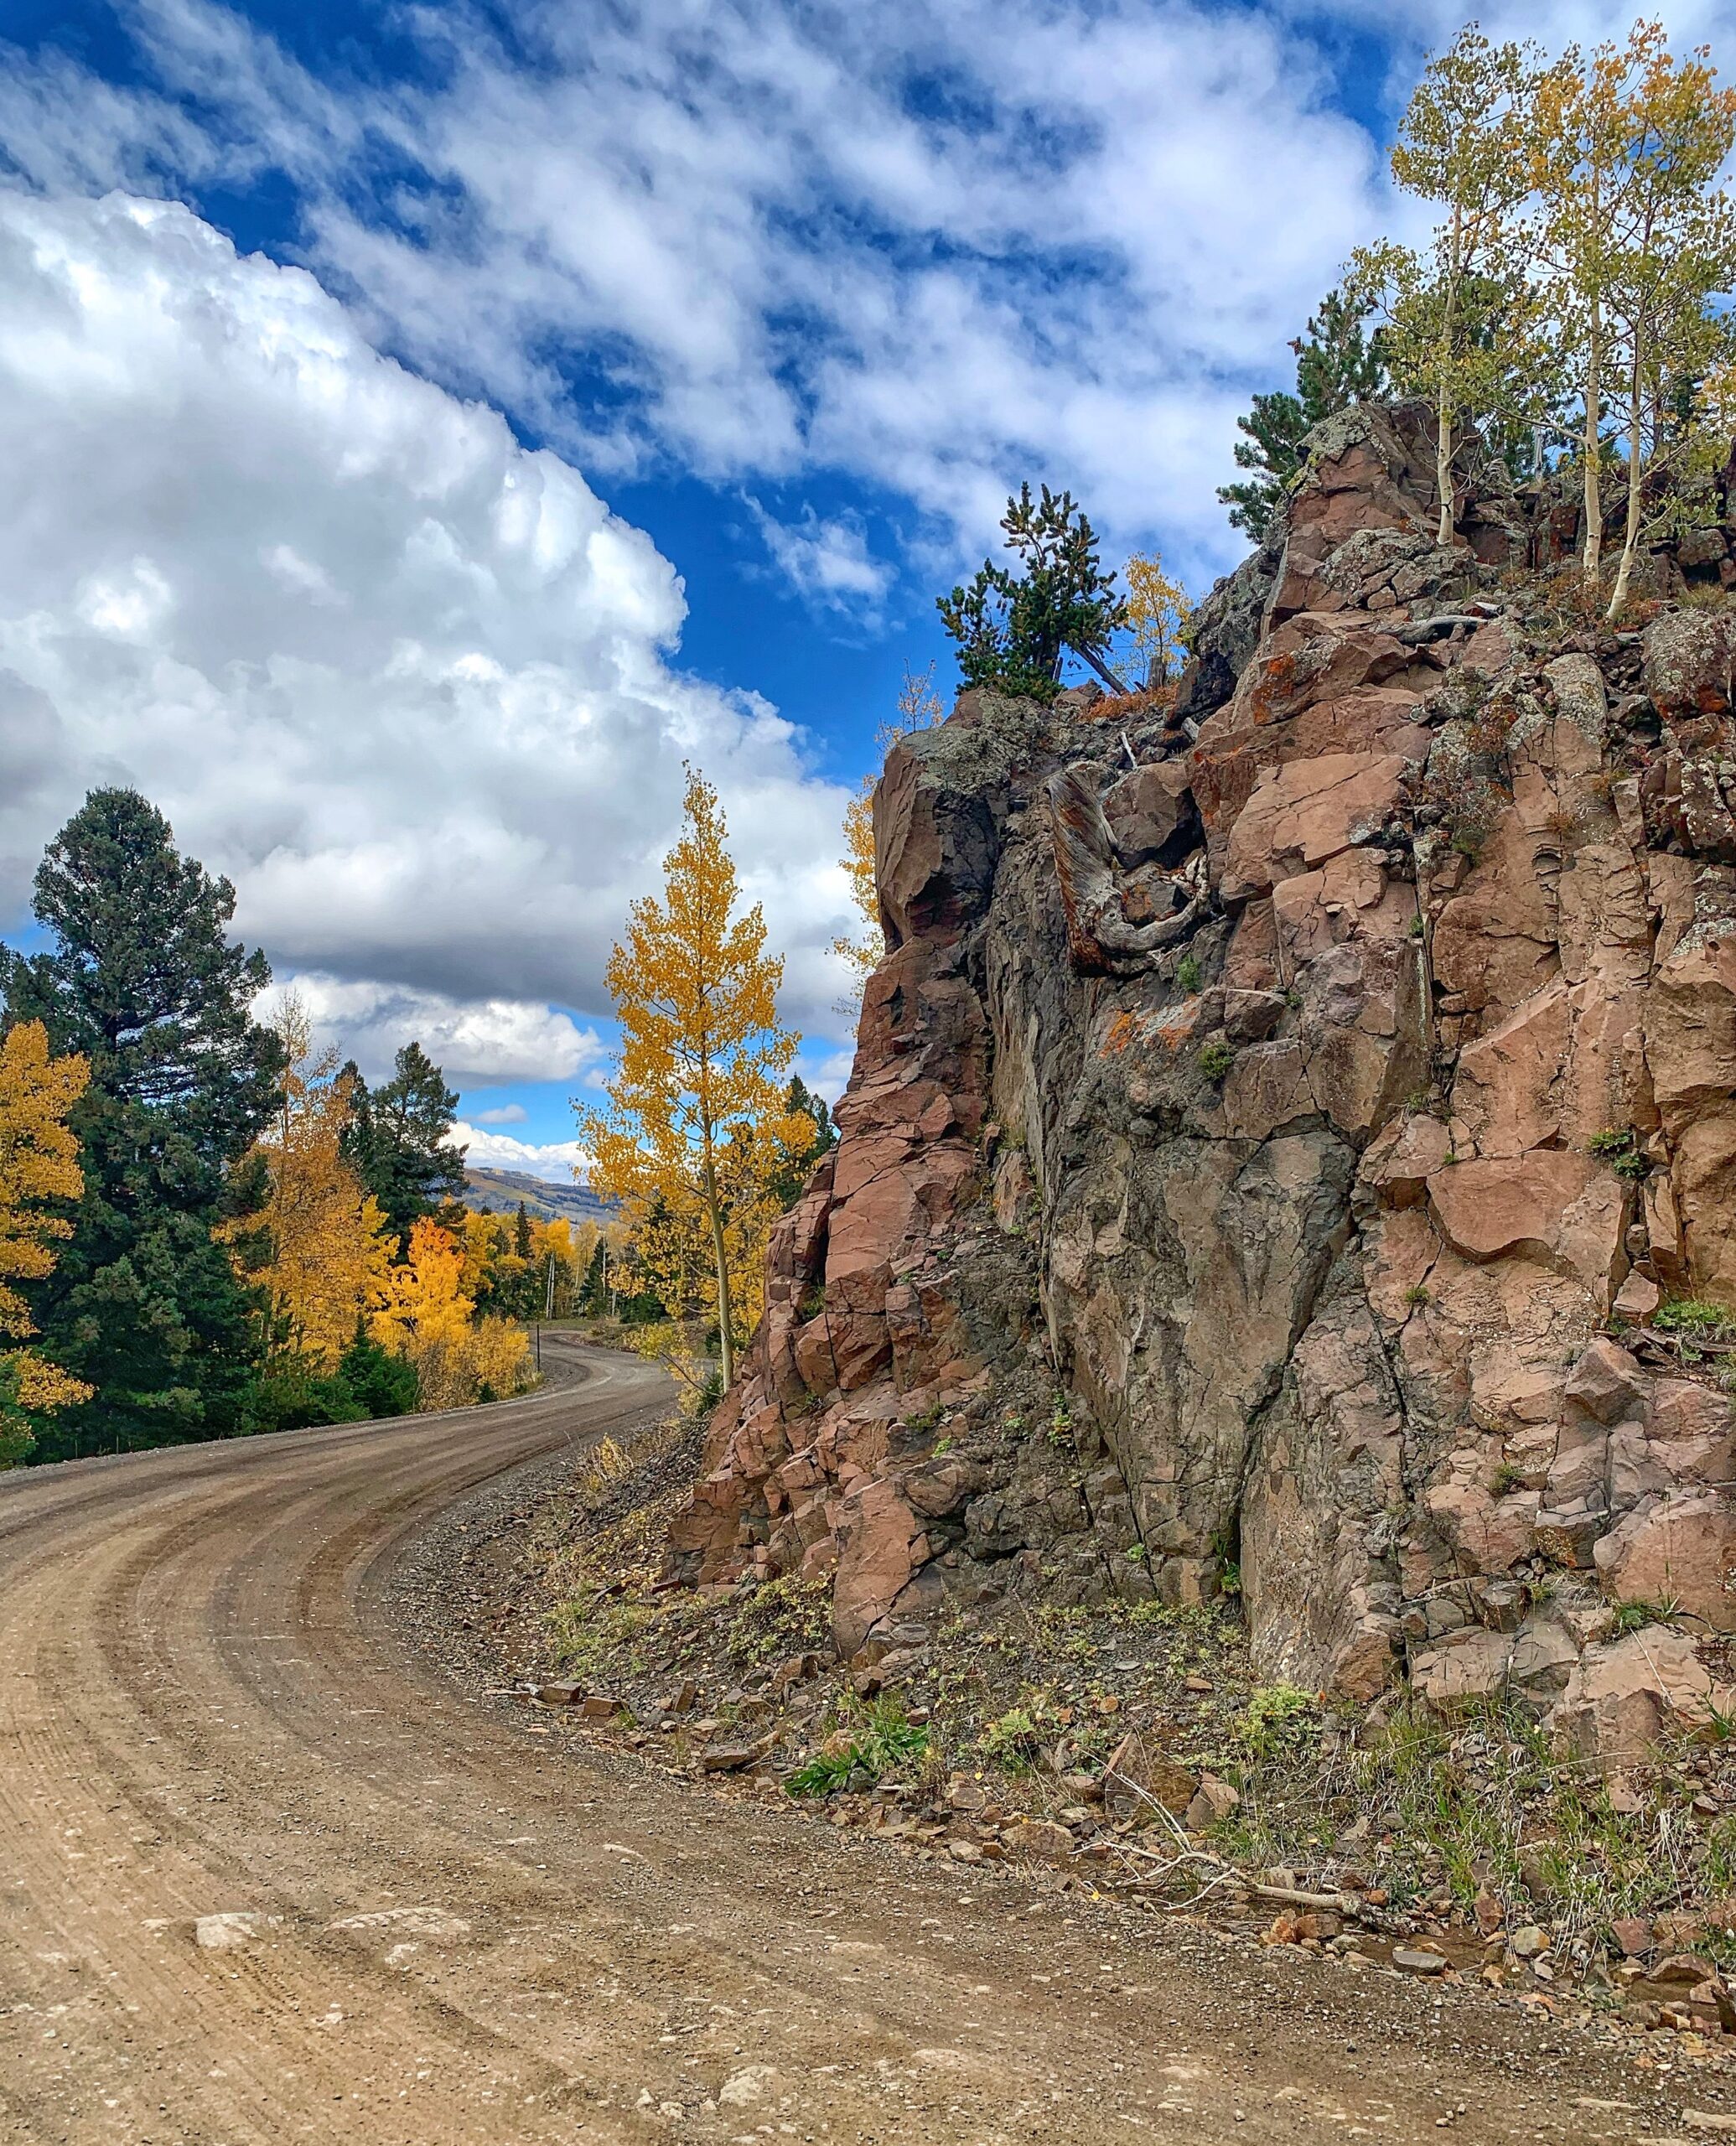 A dirt road next to a rocky cliff.